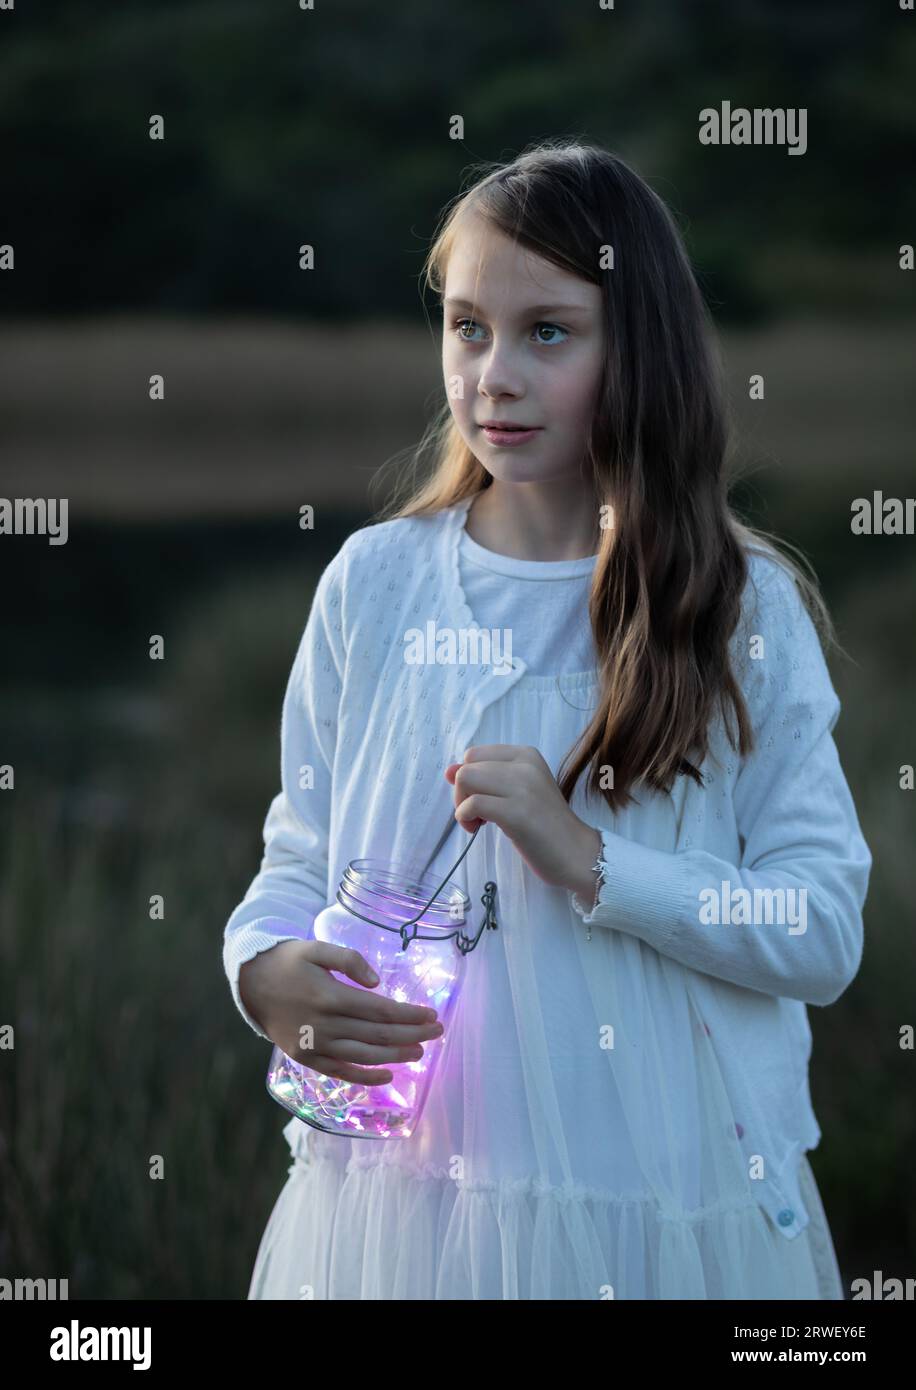 Close-up portrait of a young girl holding a glass jar with fairy lights at dusk looking to the side Stock Photo